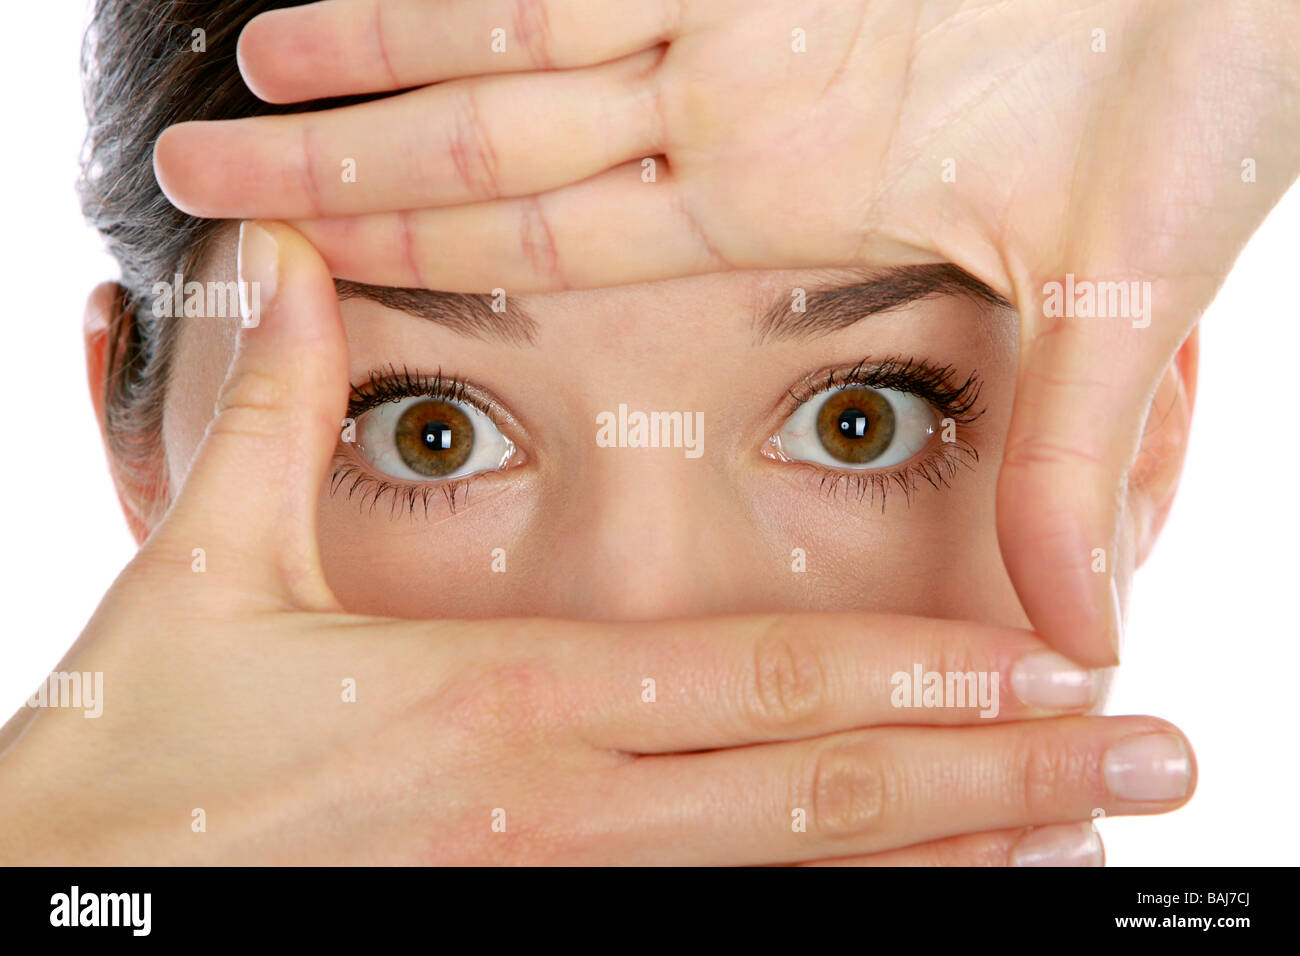 Woman looking through hands Stock Photo